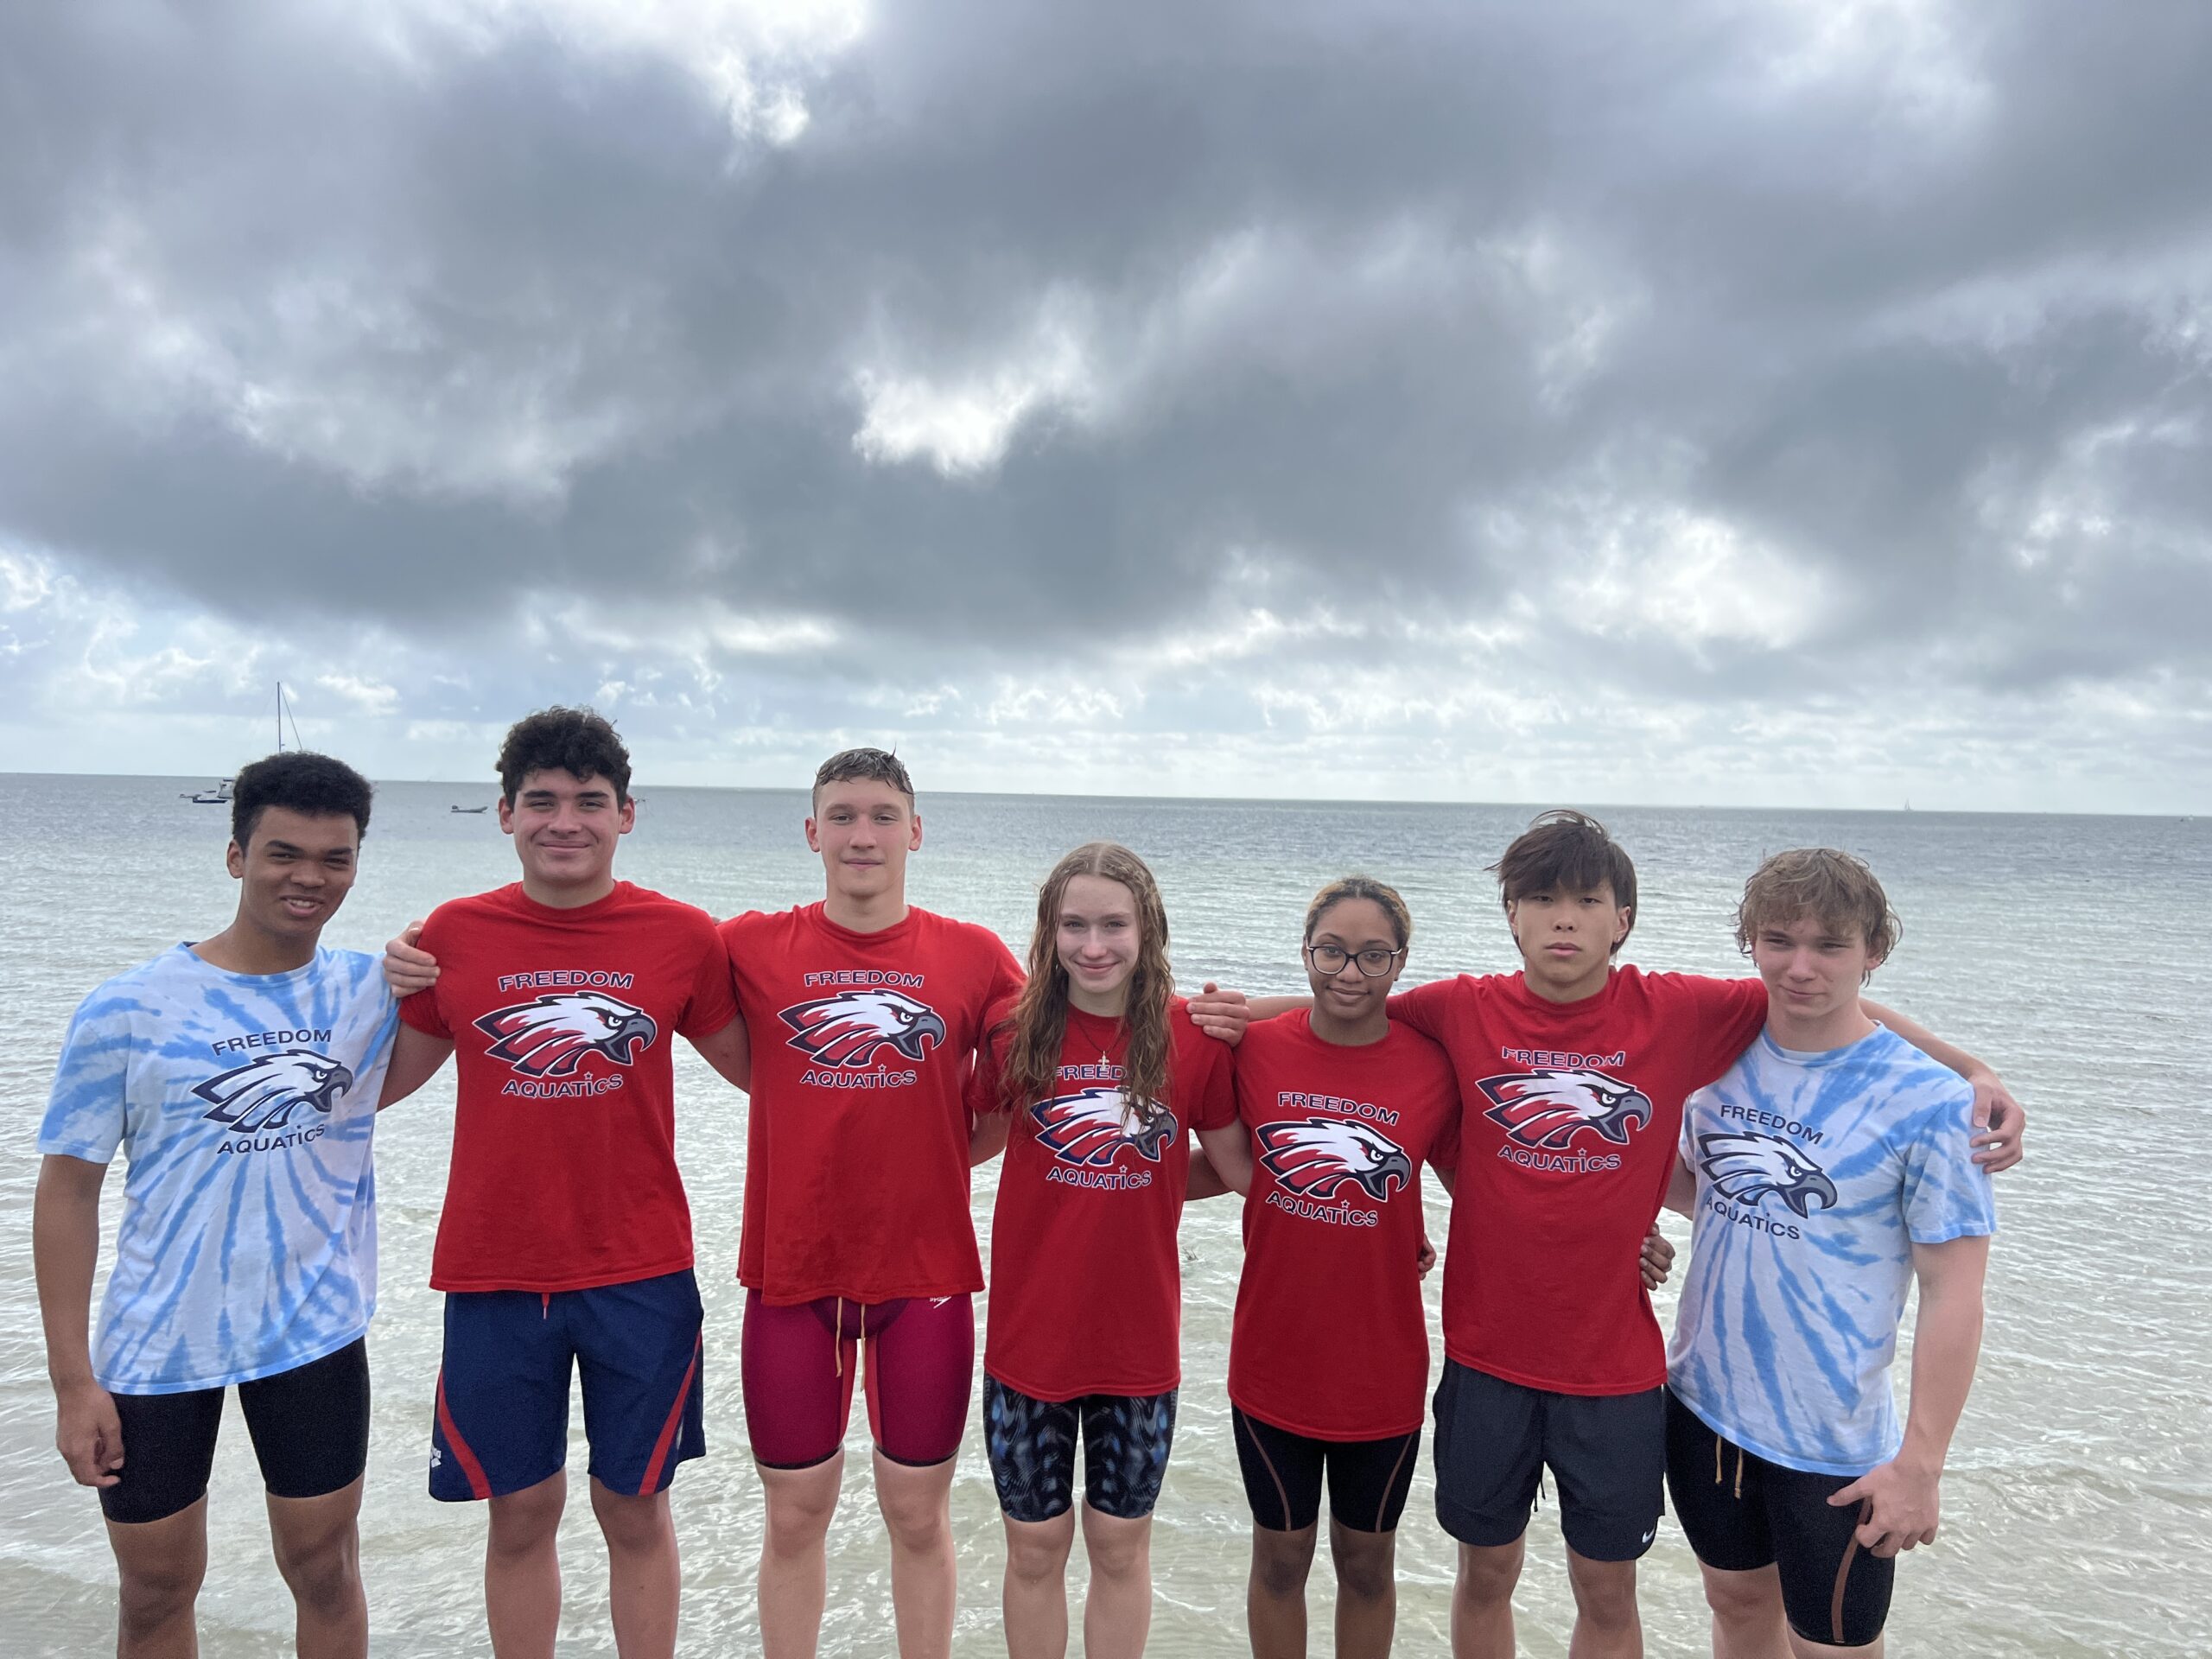 Congratulations to the Freedom Aquatics swimmers that competed at the